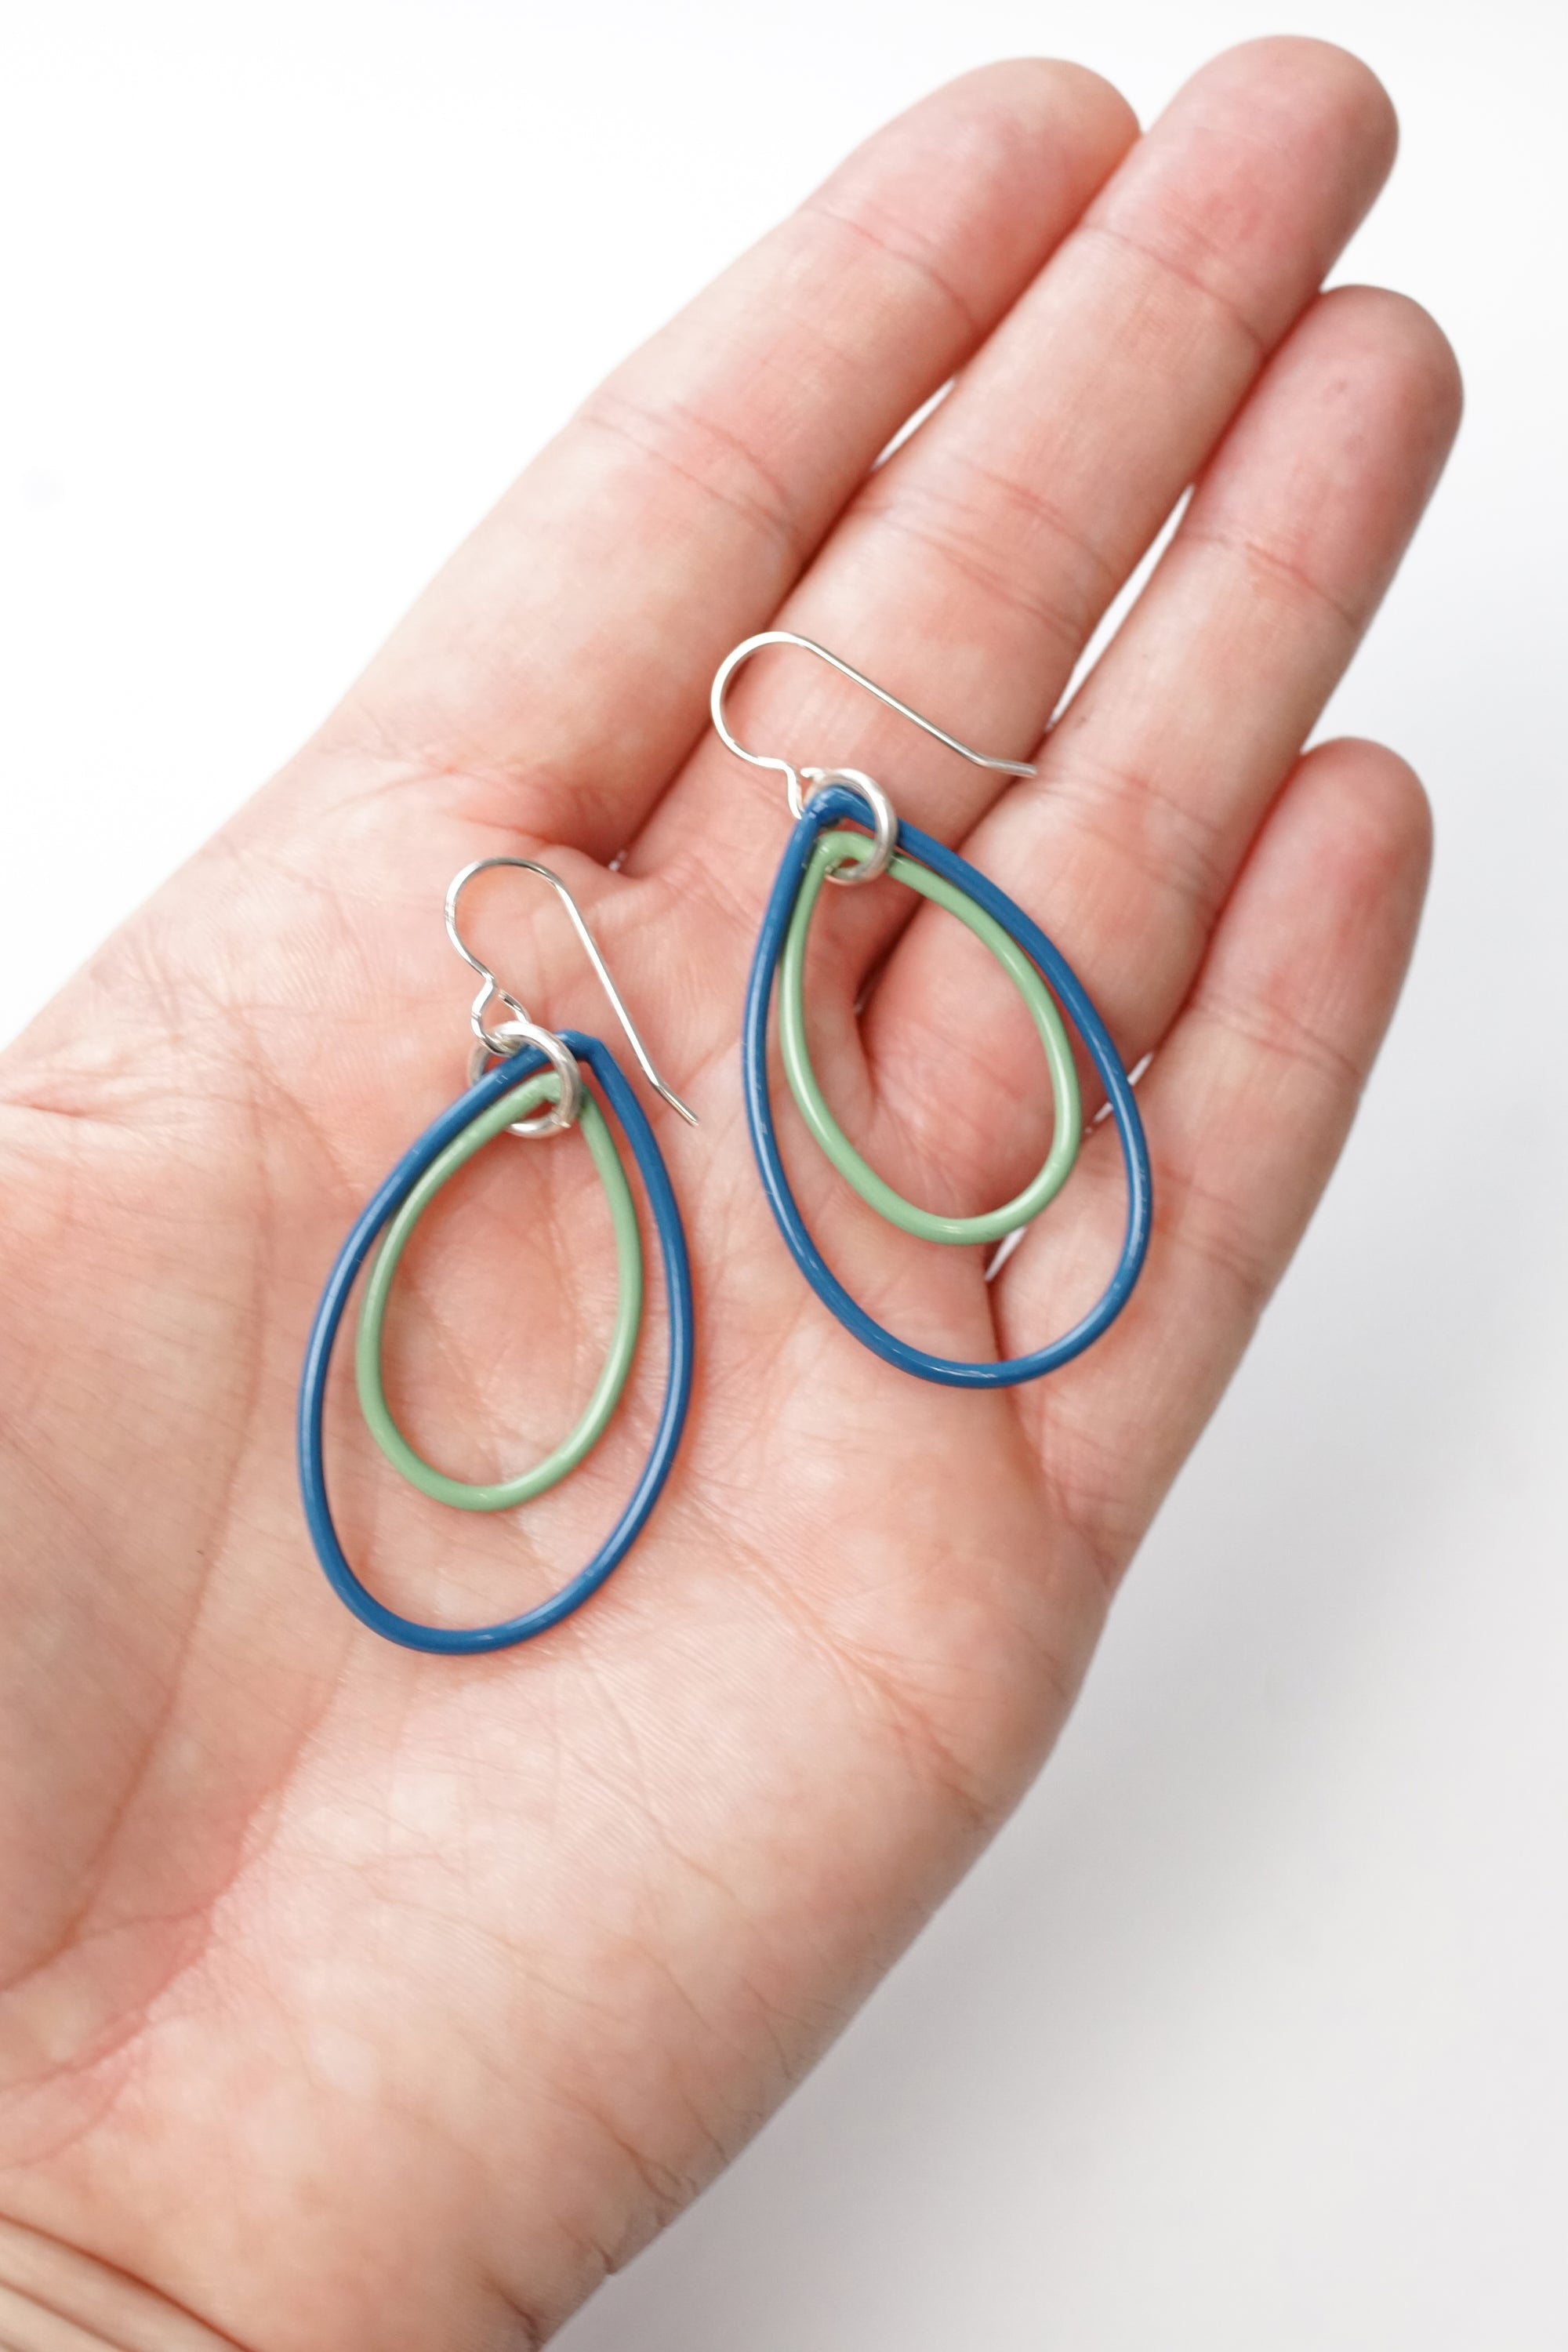 Nellie earrings in Azure Blue and Pale Green